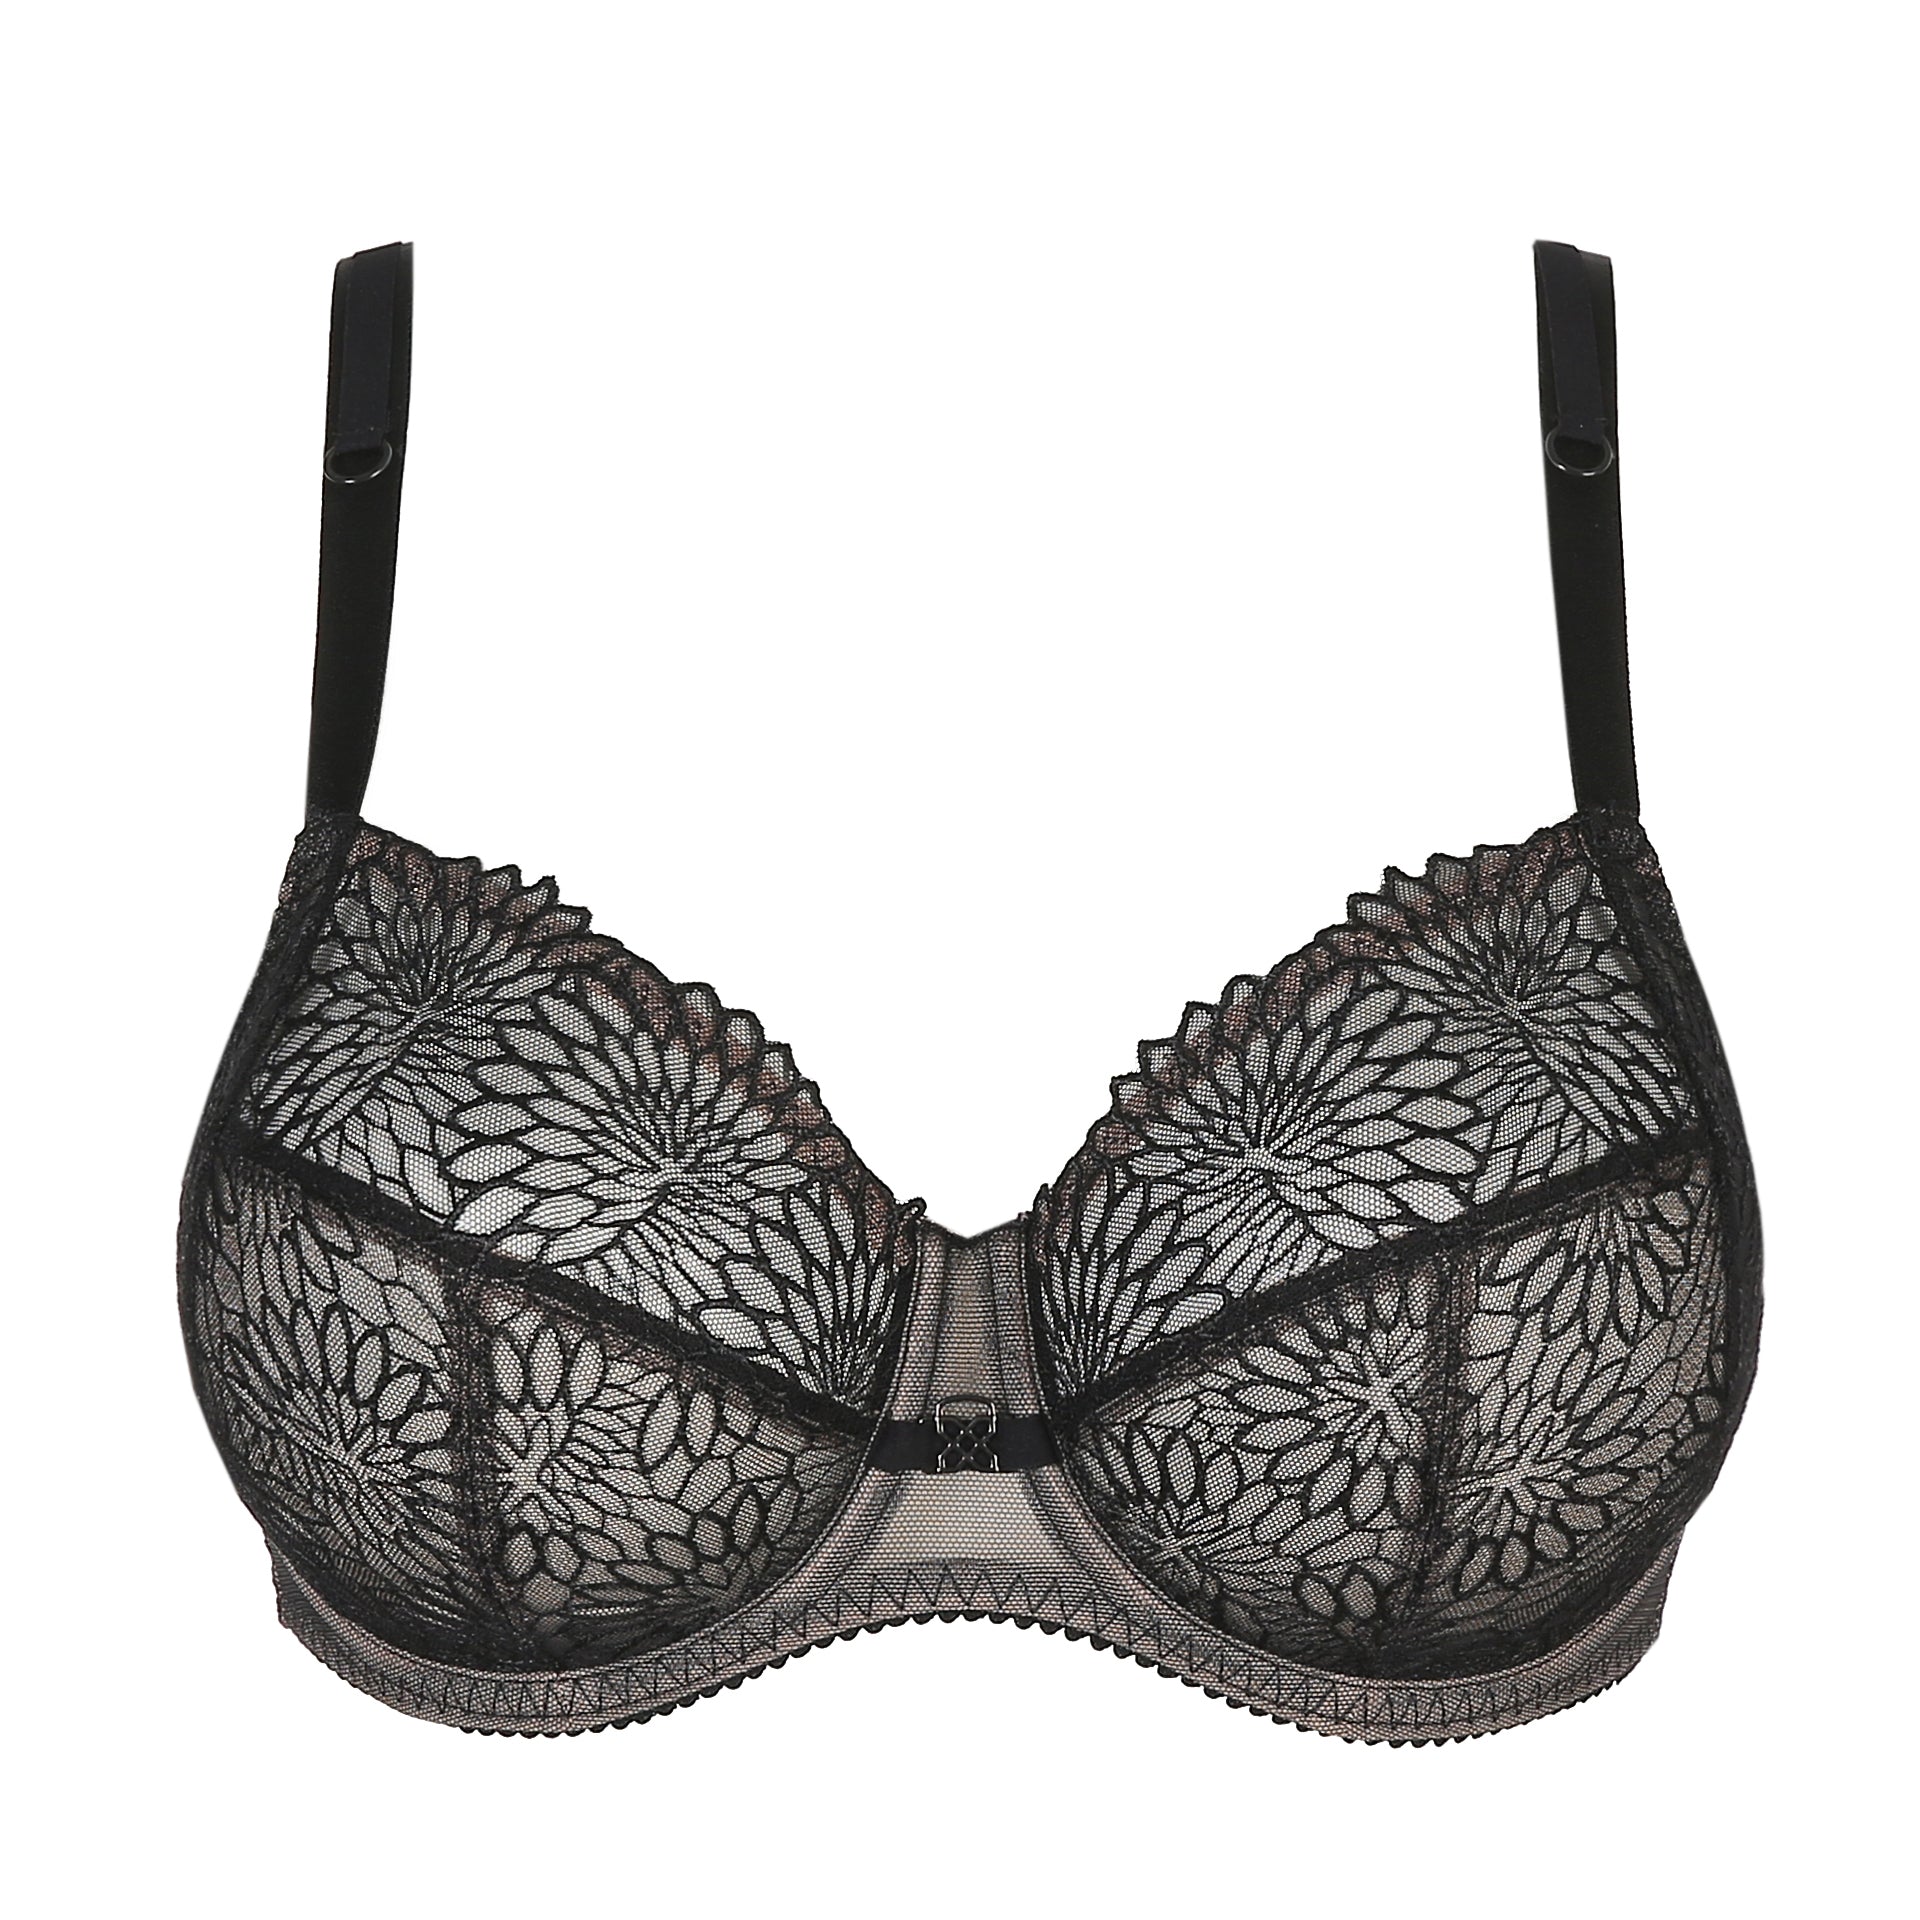 DD+ Sophora Full Cup Bra with decorative straps removed in Black by PrimaDonna.